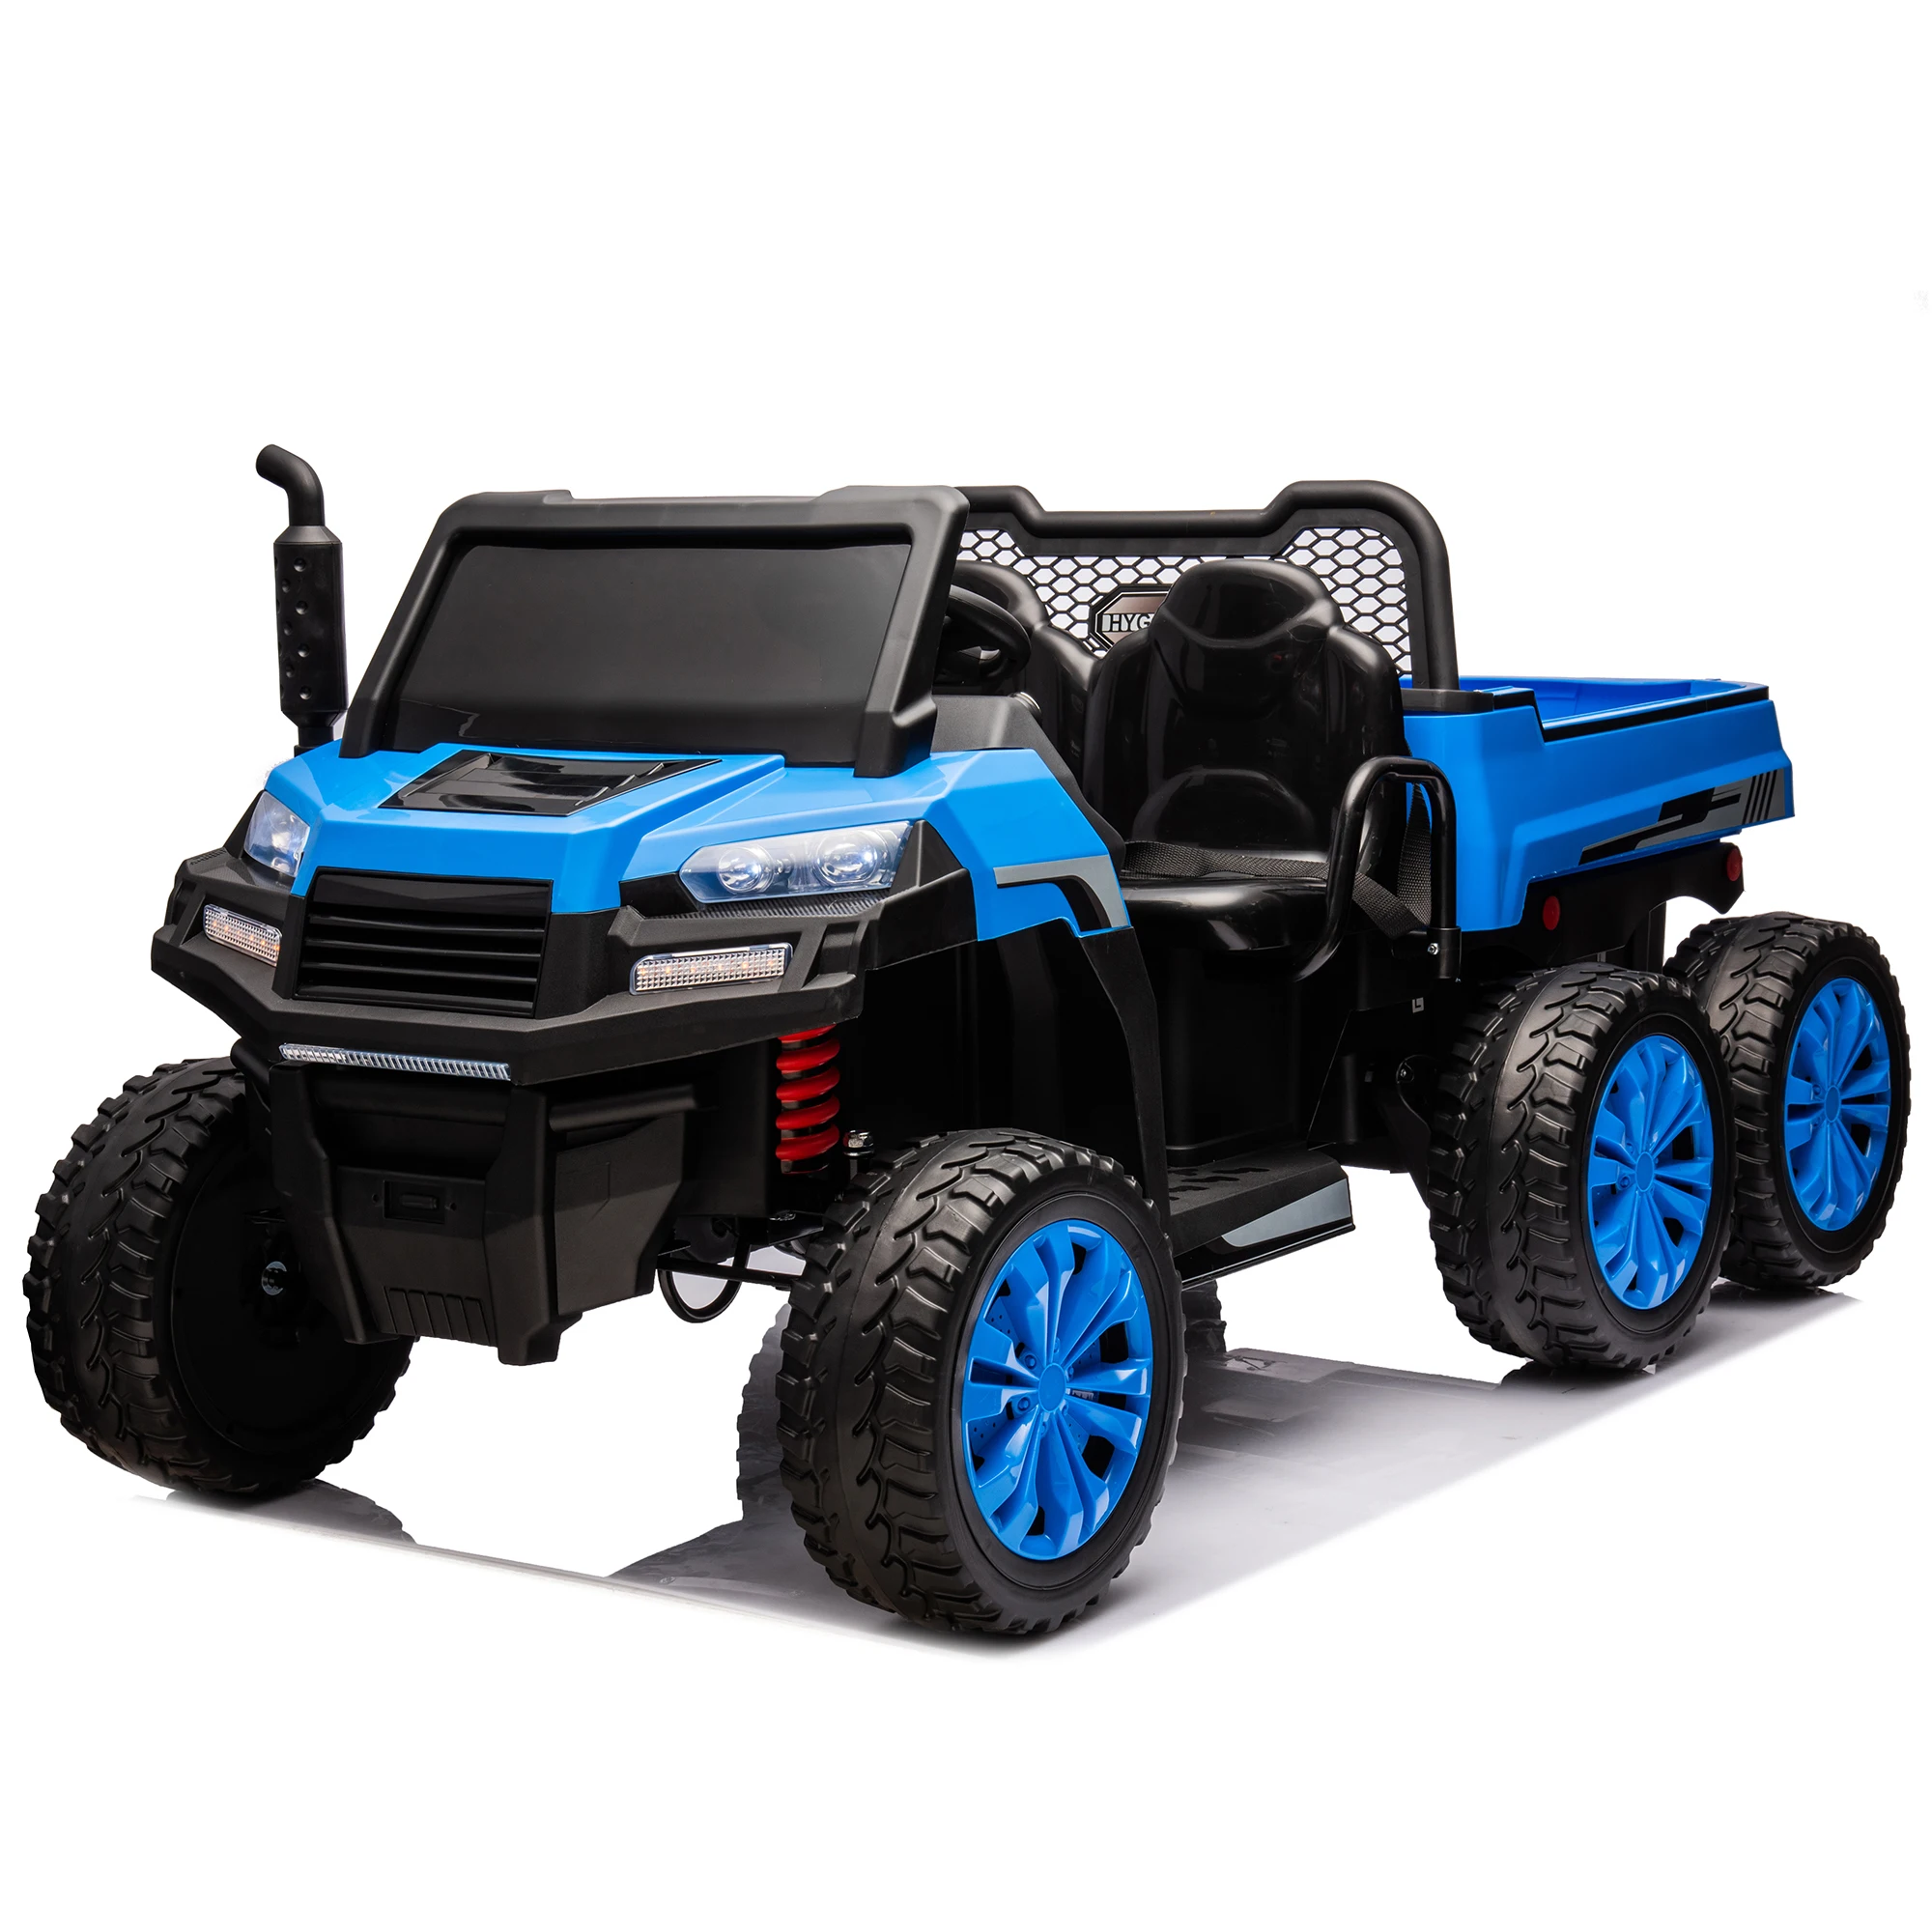 

24V 2-Seater UTV-XXL Ride On Truck with Dump Bed for kid,Ride On 4WD UTV with 6 Wheels,Foam Tires, Suitable for Off-Roading,remo